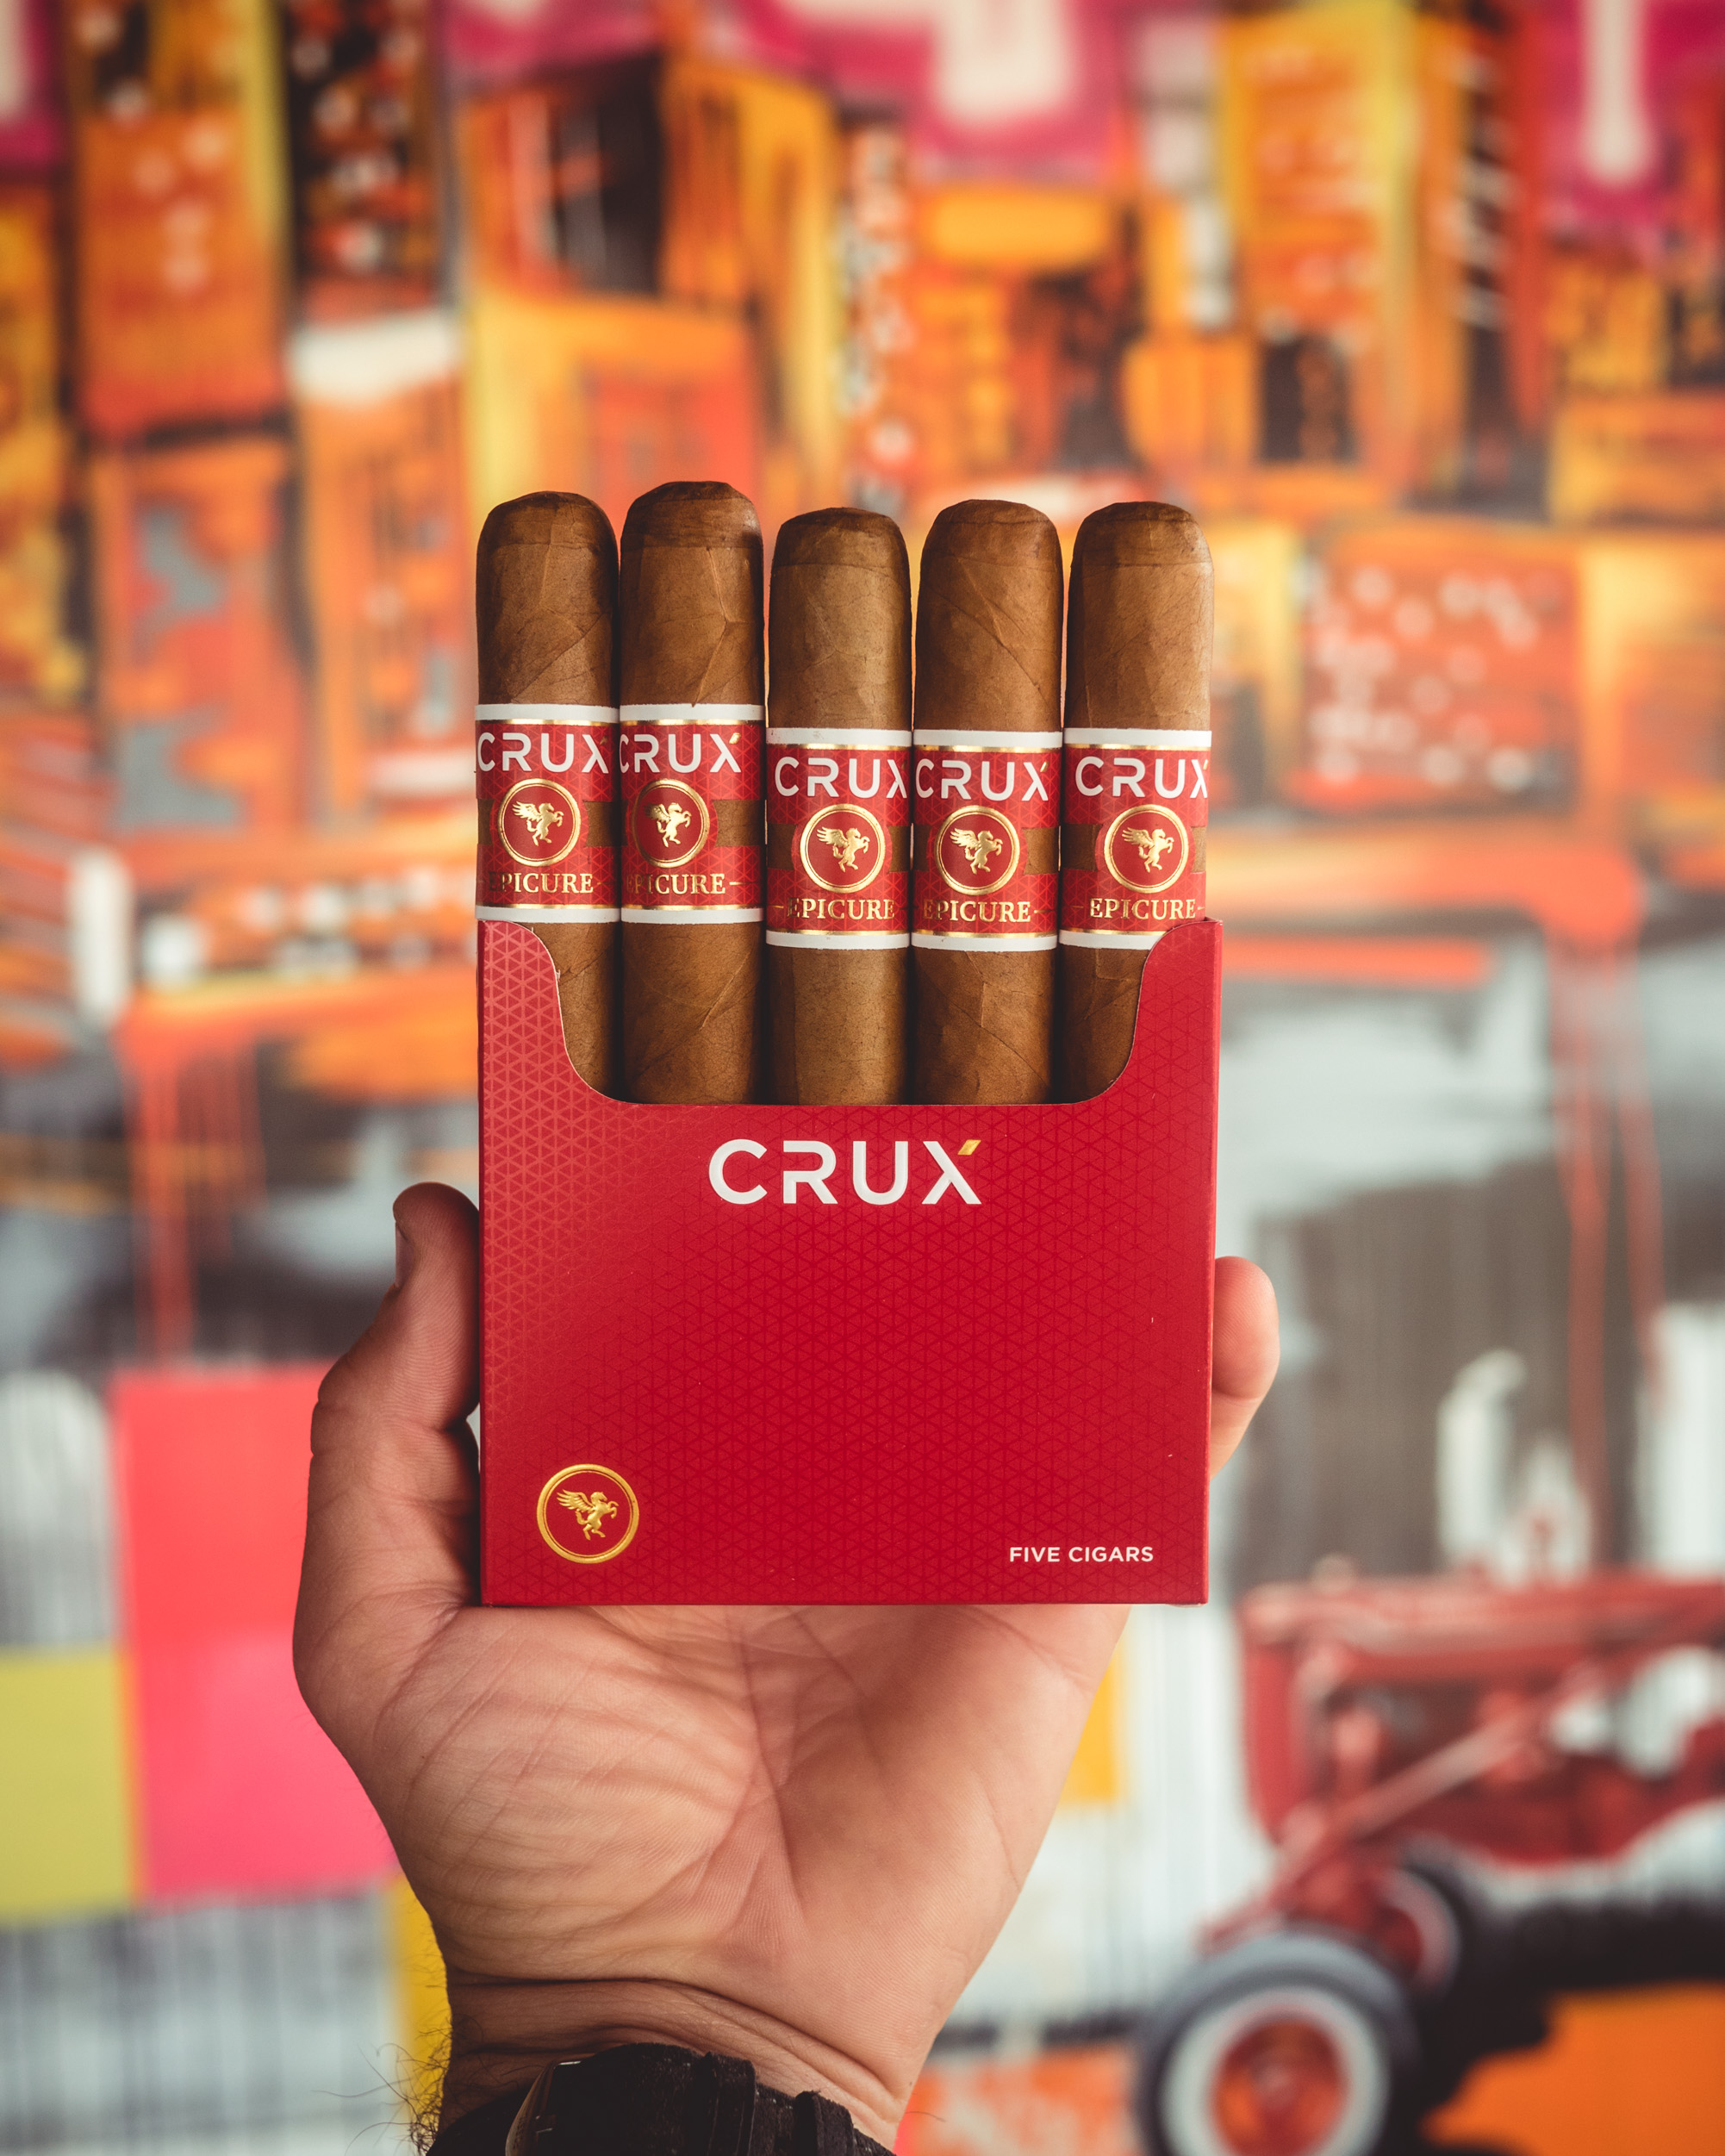 Crux Cigars 5-pack rebranded layout